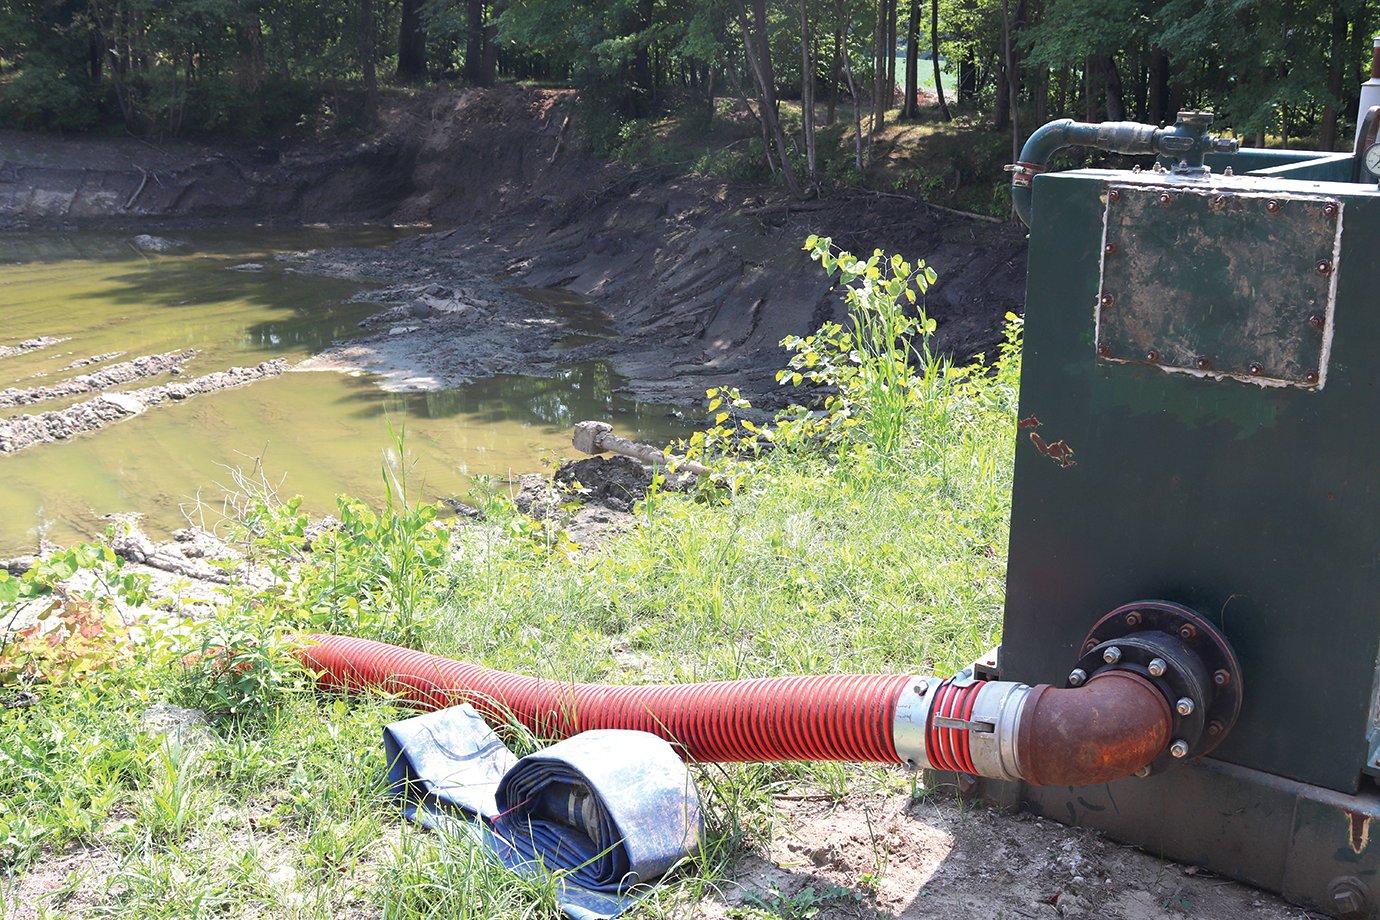 An industrial-sized pump sits idle after draining the pond at the Darlington Conservation Club earlier this week. Water removed from the pond was emptied into a ravine which in turn empties into Sugar Creek closeby.